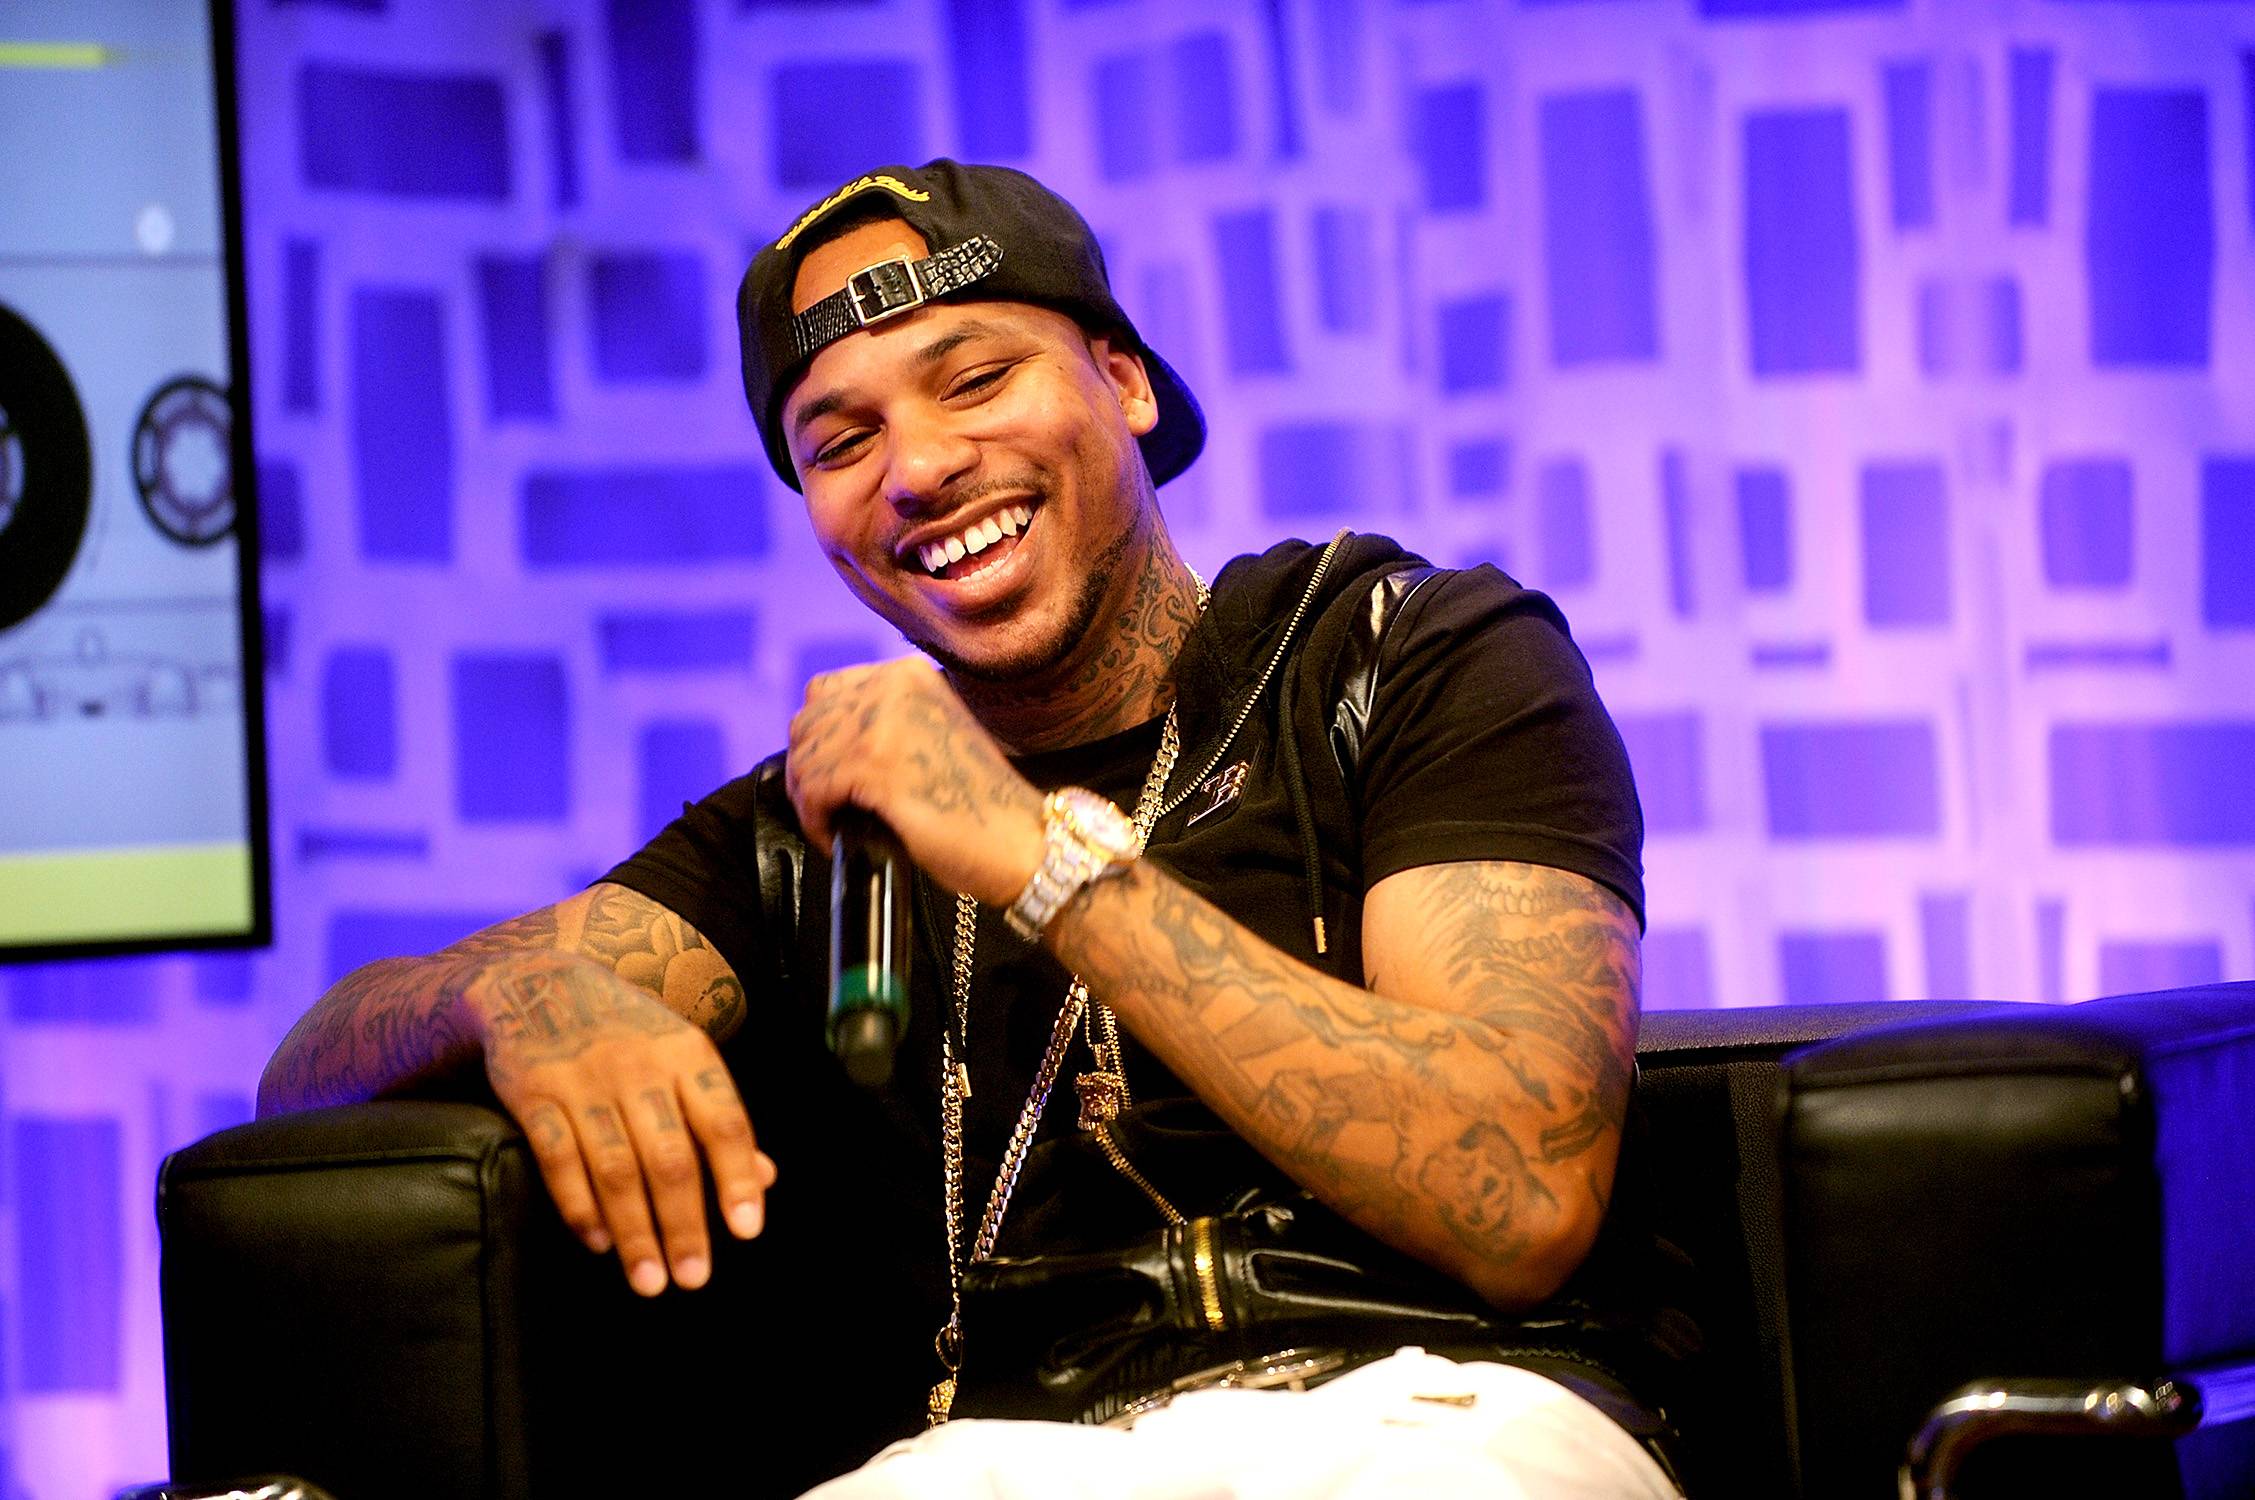 Chinx - The Queens-born member of the Coke Boys crew was on the verge of stardom via French Montana’s new Coke Boys label, having rocked mixtapes like Cocaine Riot 1 &amp; 2. The 31-year-old died from gunshot wounds on May 17.&nbsp;&nbsp;(Photo: Brad Barket/Getty Images for BET)